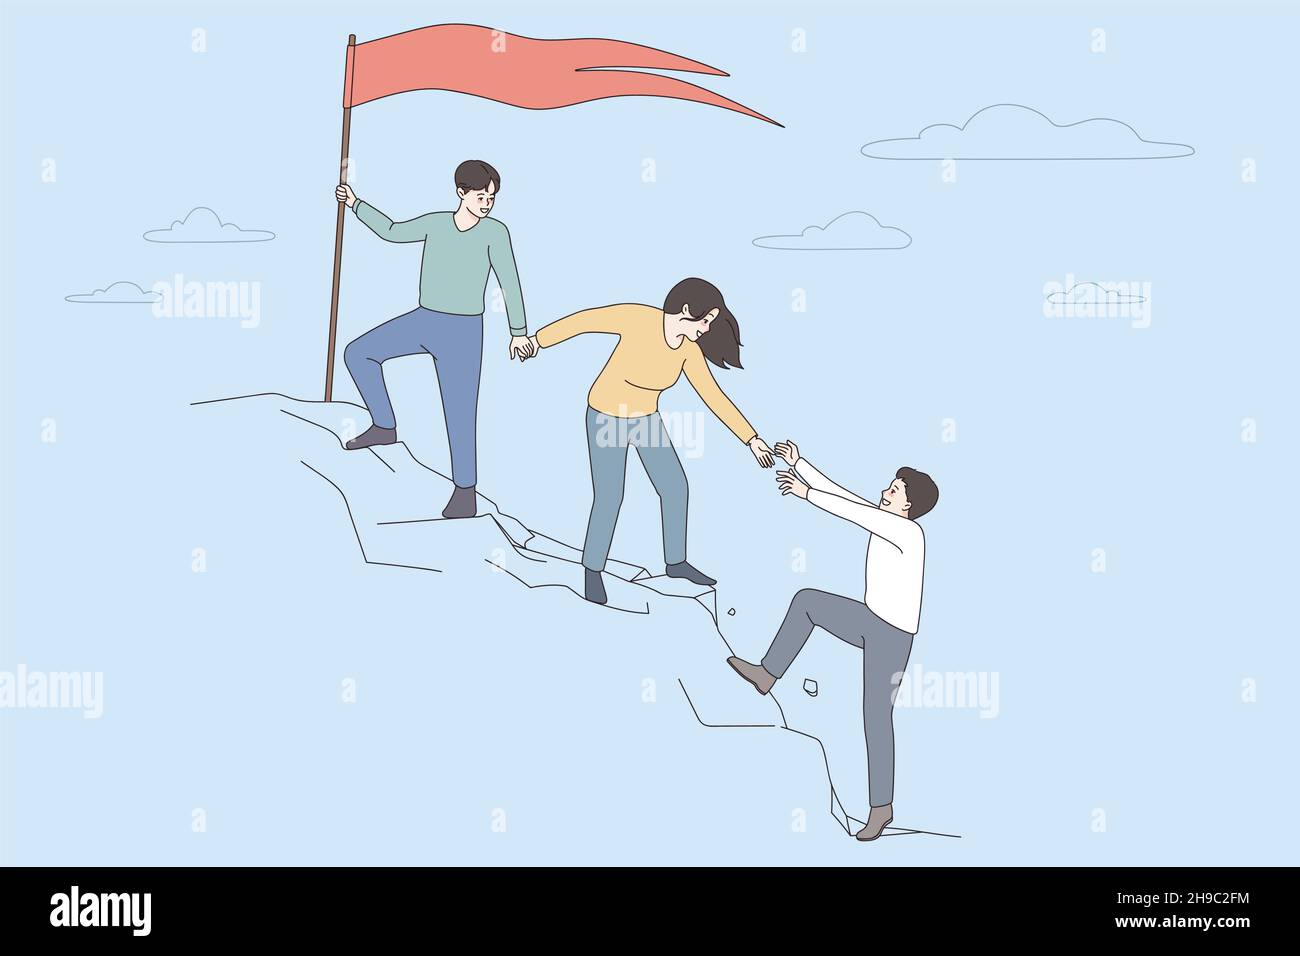 Teamwork, success and achievement concept. Group of Young coworkers helping each other to climb up mountain to reach red flag together vector illustration  Stock Vector